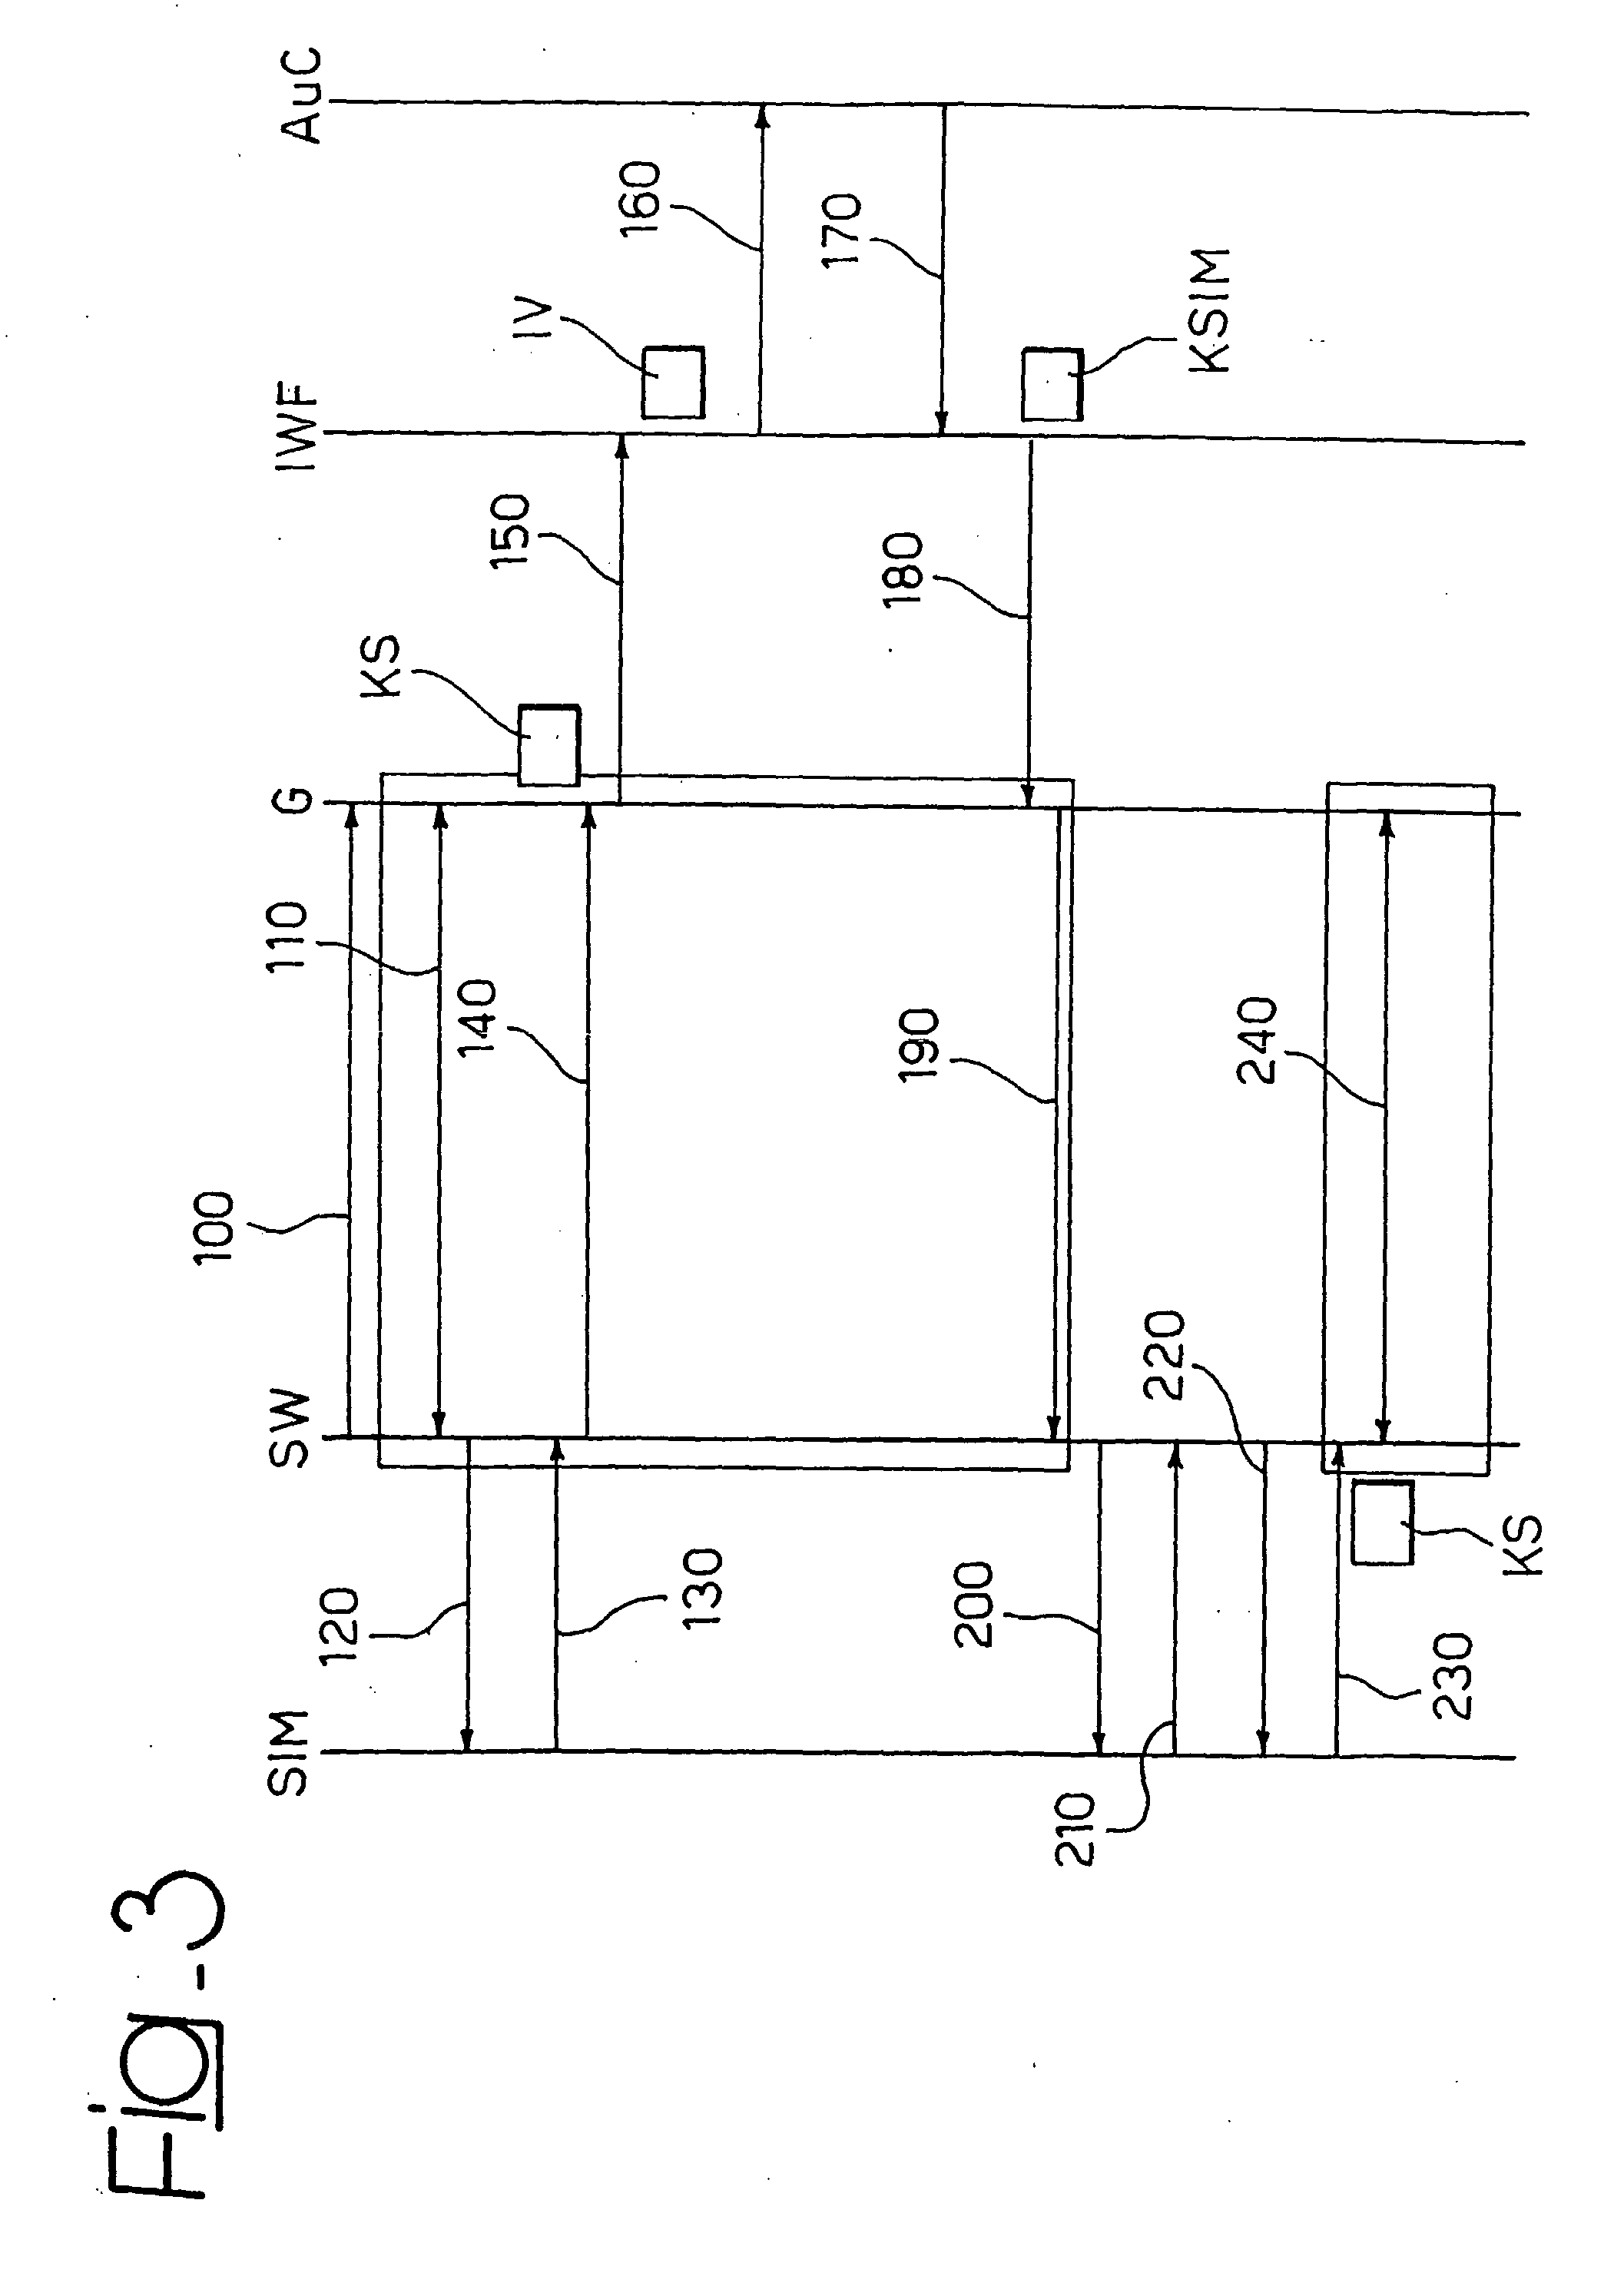 Method And System For A Secure Connection In Communication Networks